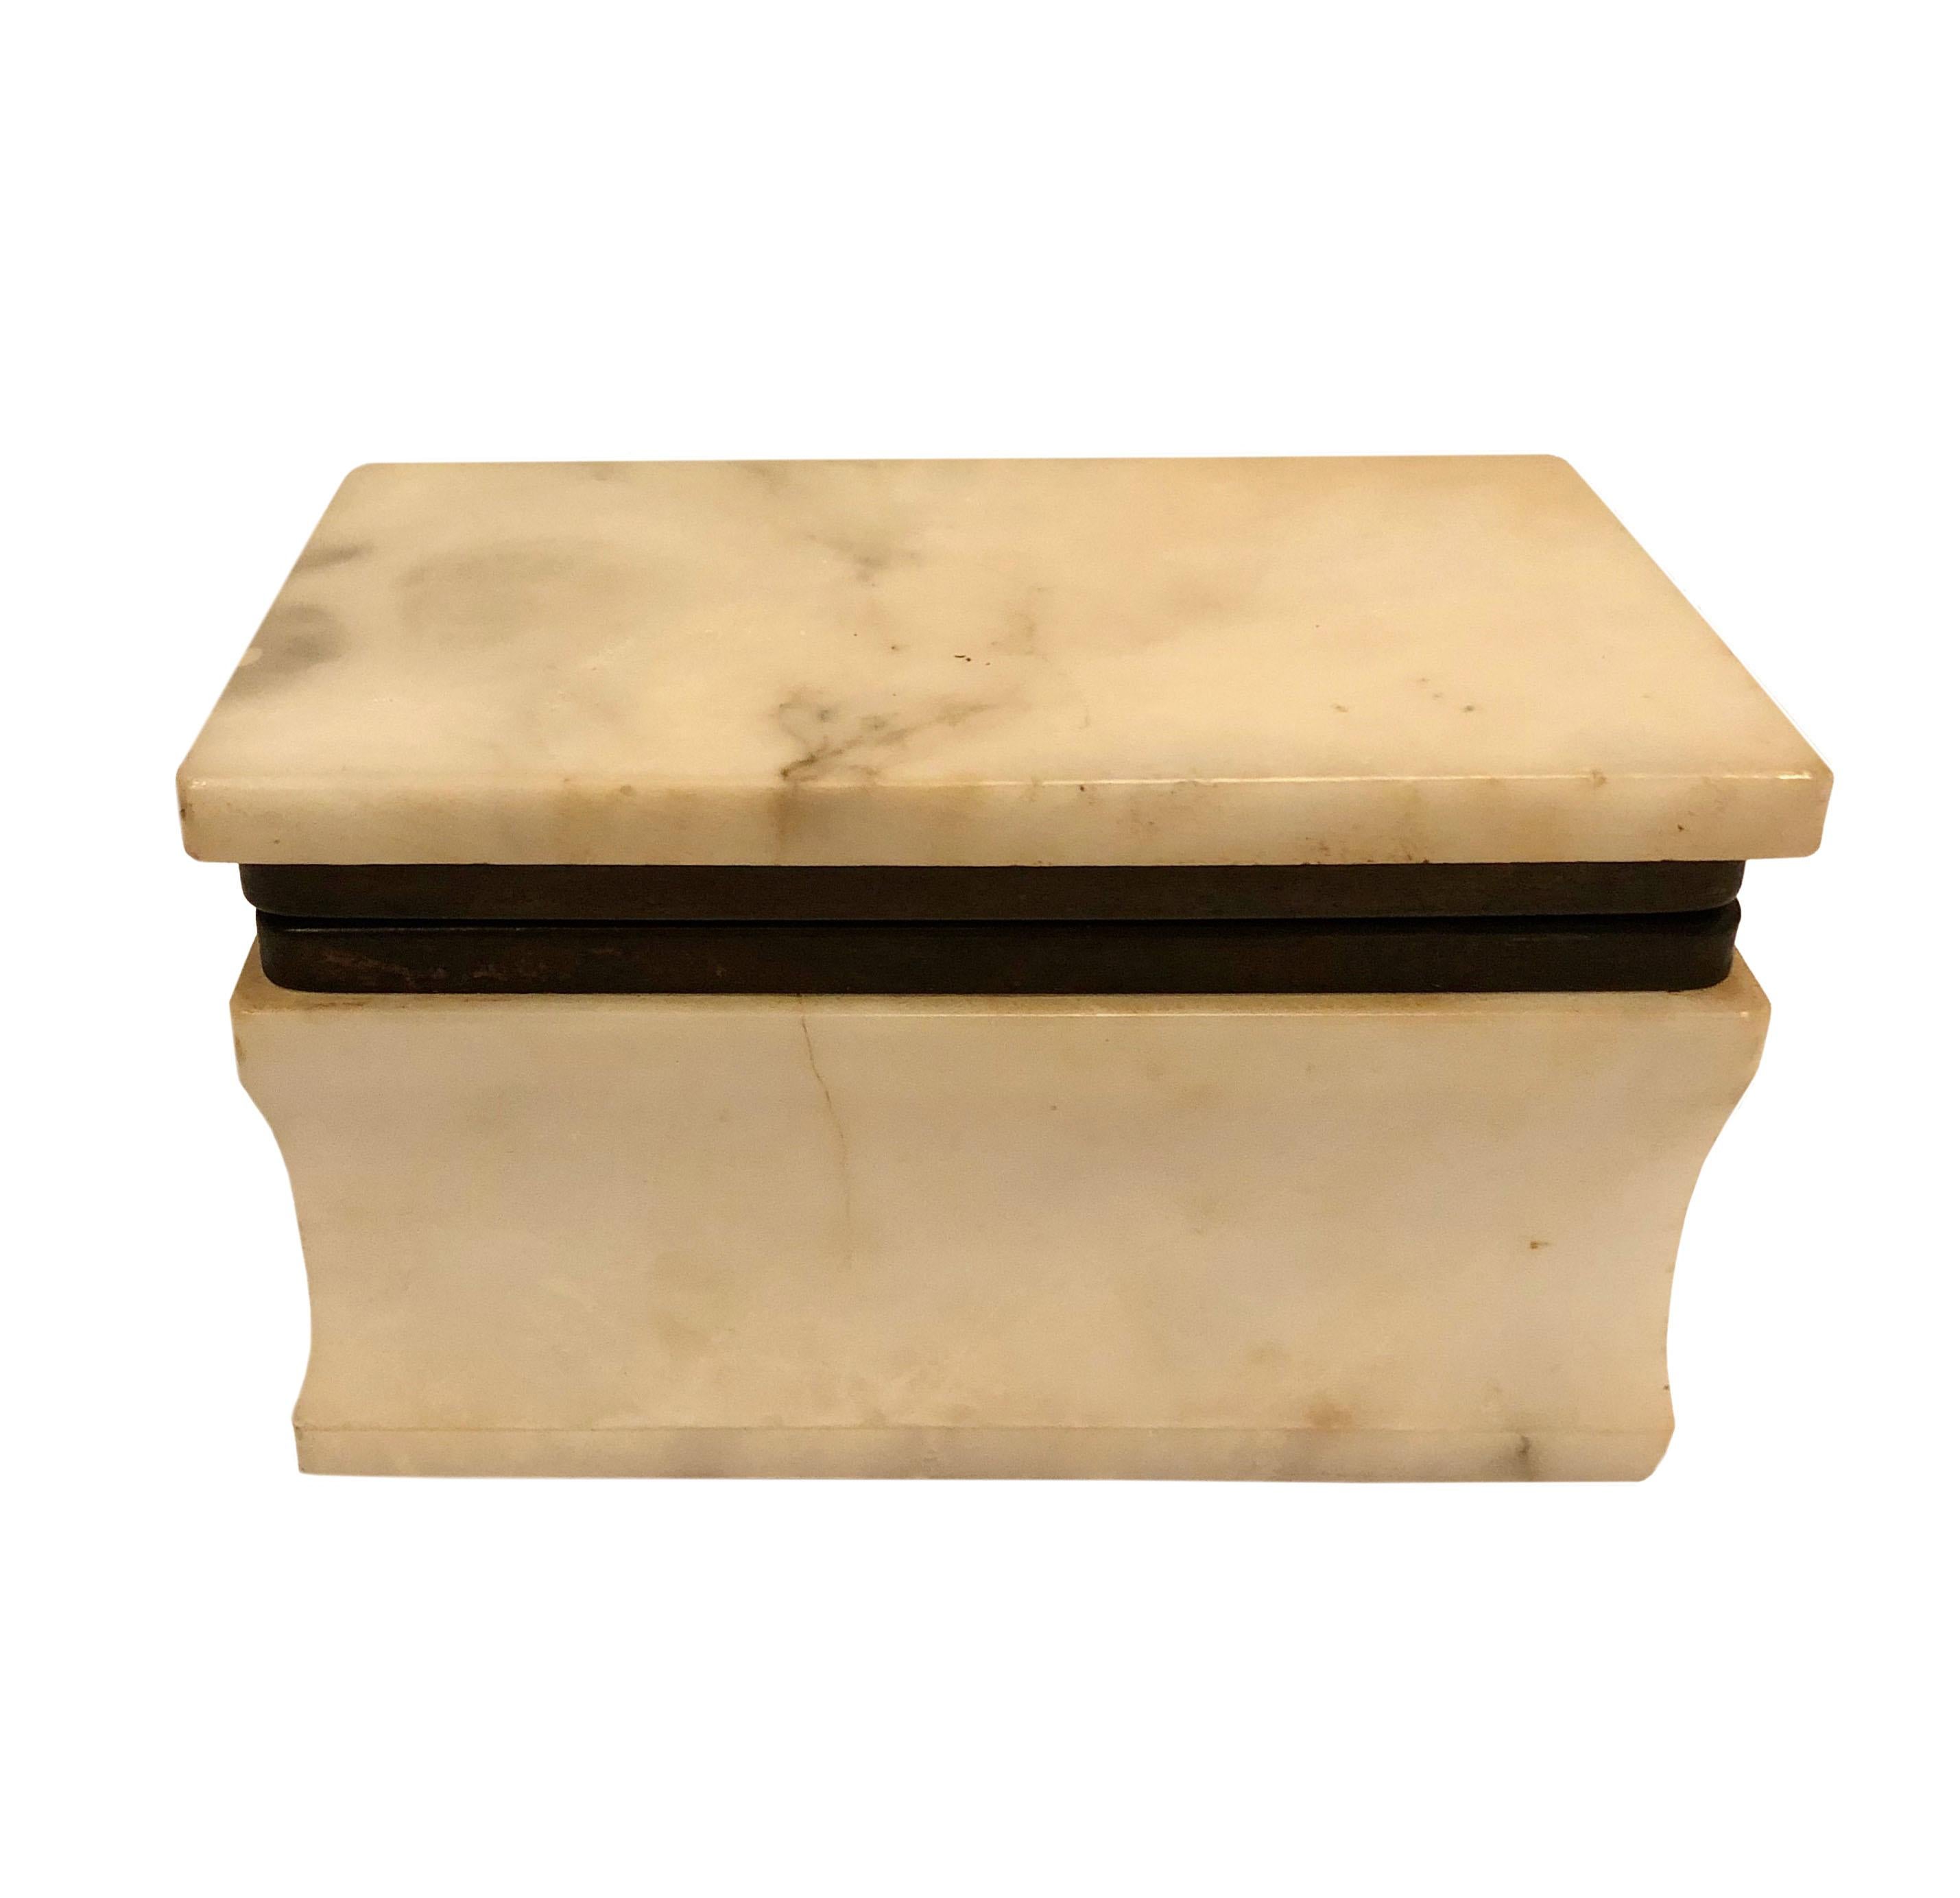 A 1940s Italian cream colored marble table top box with great style and a hinged lid.